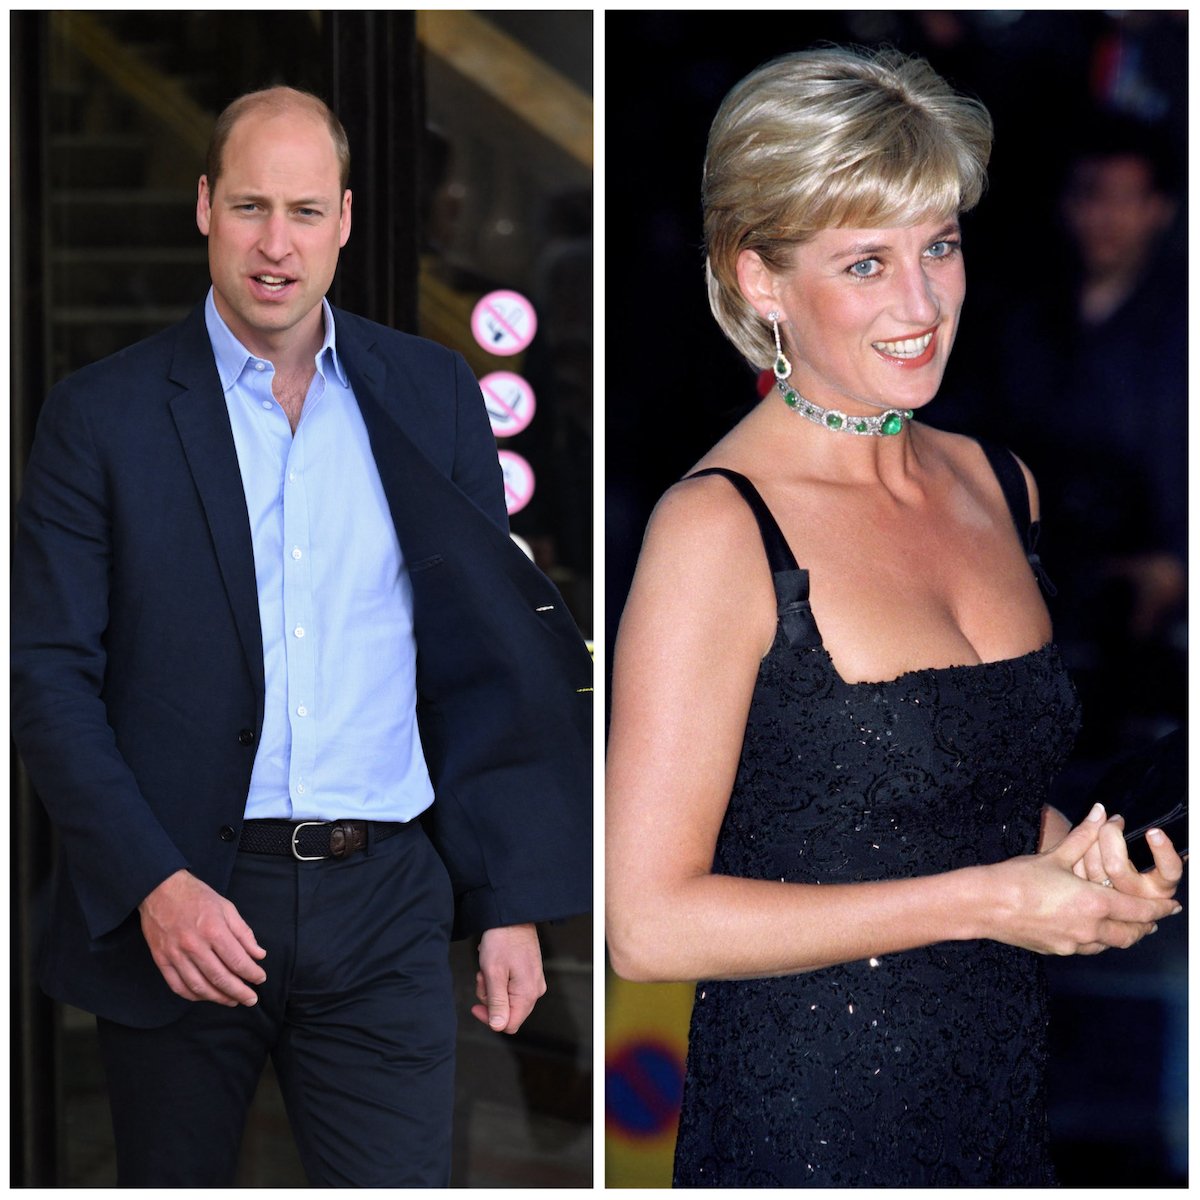 Prince William, who appeared in London in the last photos of Prince William taken with Princess Diana before her death, in a composite image next to Princess Diana in 1997